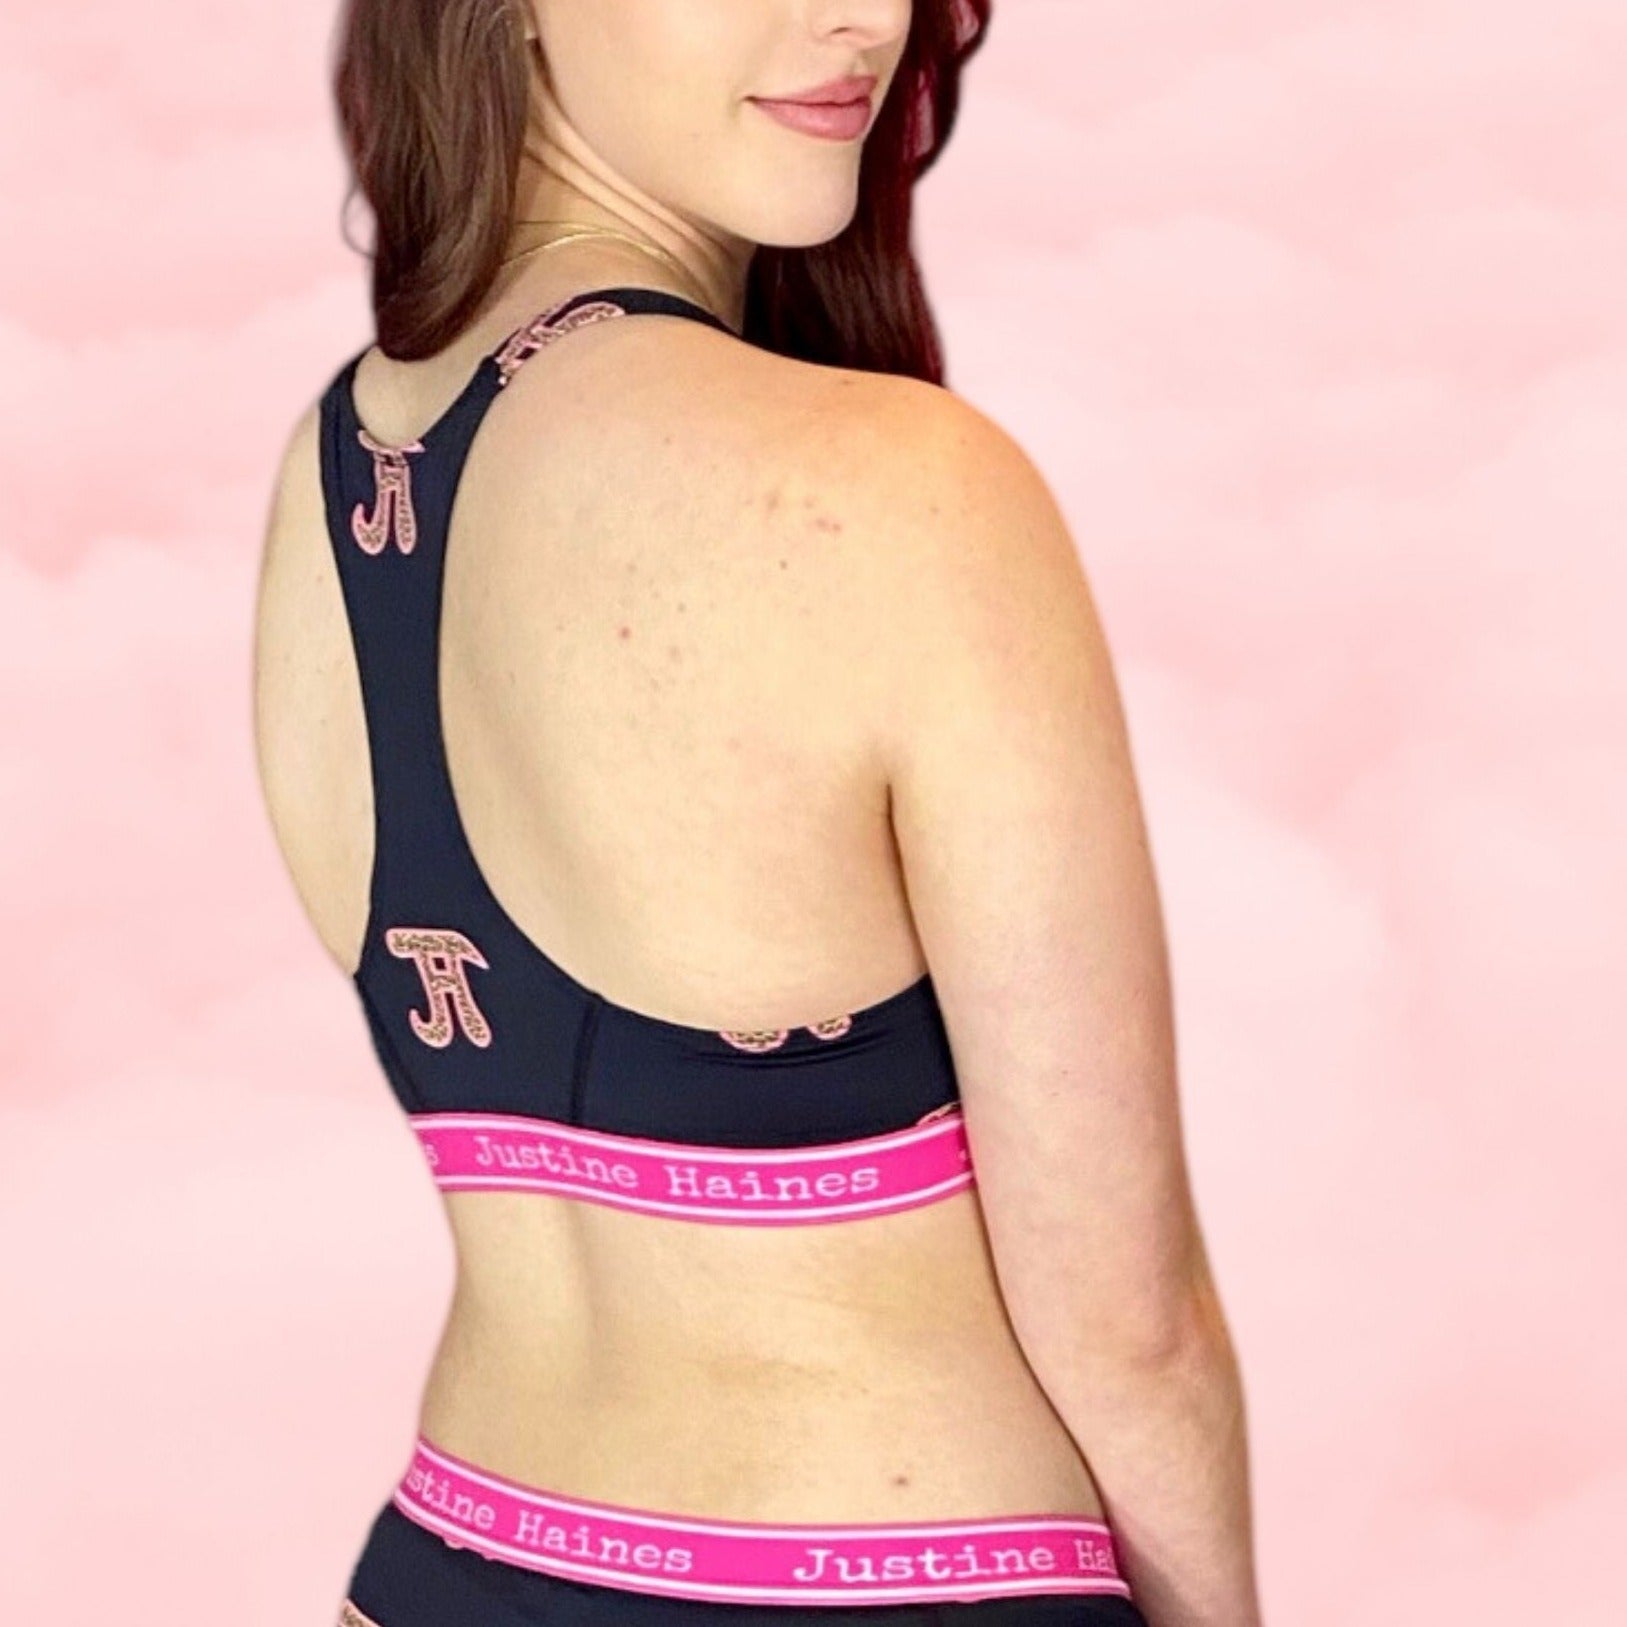 https://www.justinehaines.com/products/full-coverage-t-back-racer-sports-bra-in-jh-logo-with-leopard